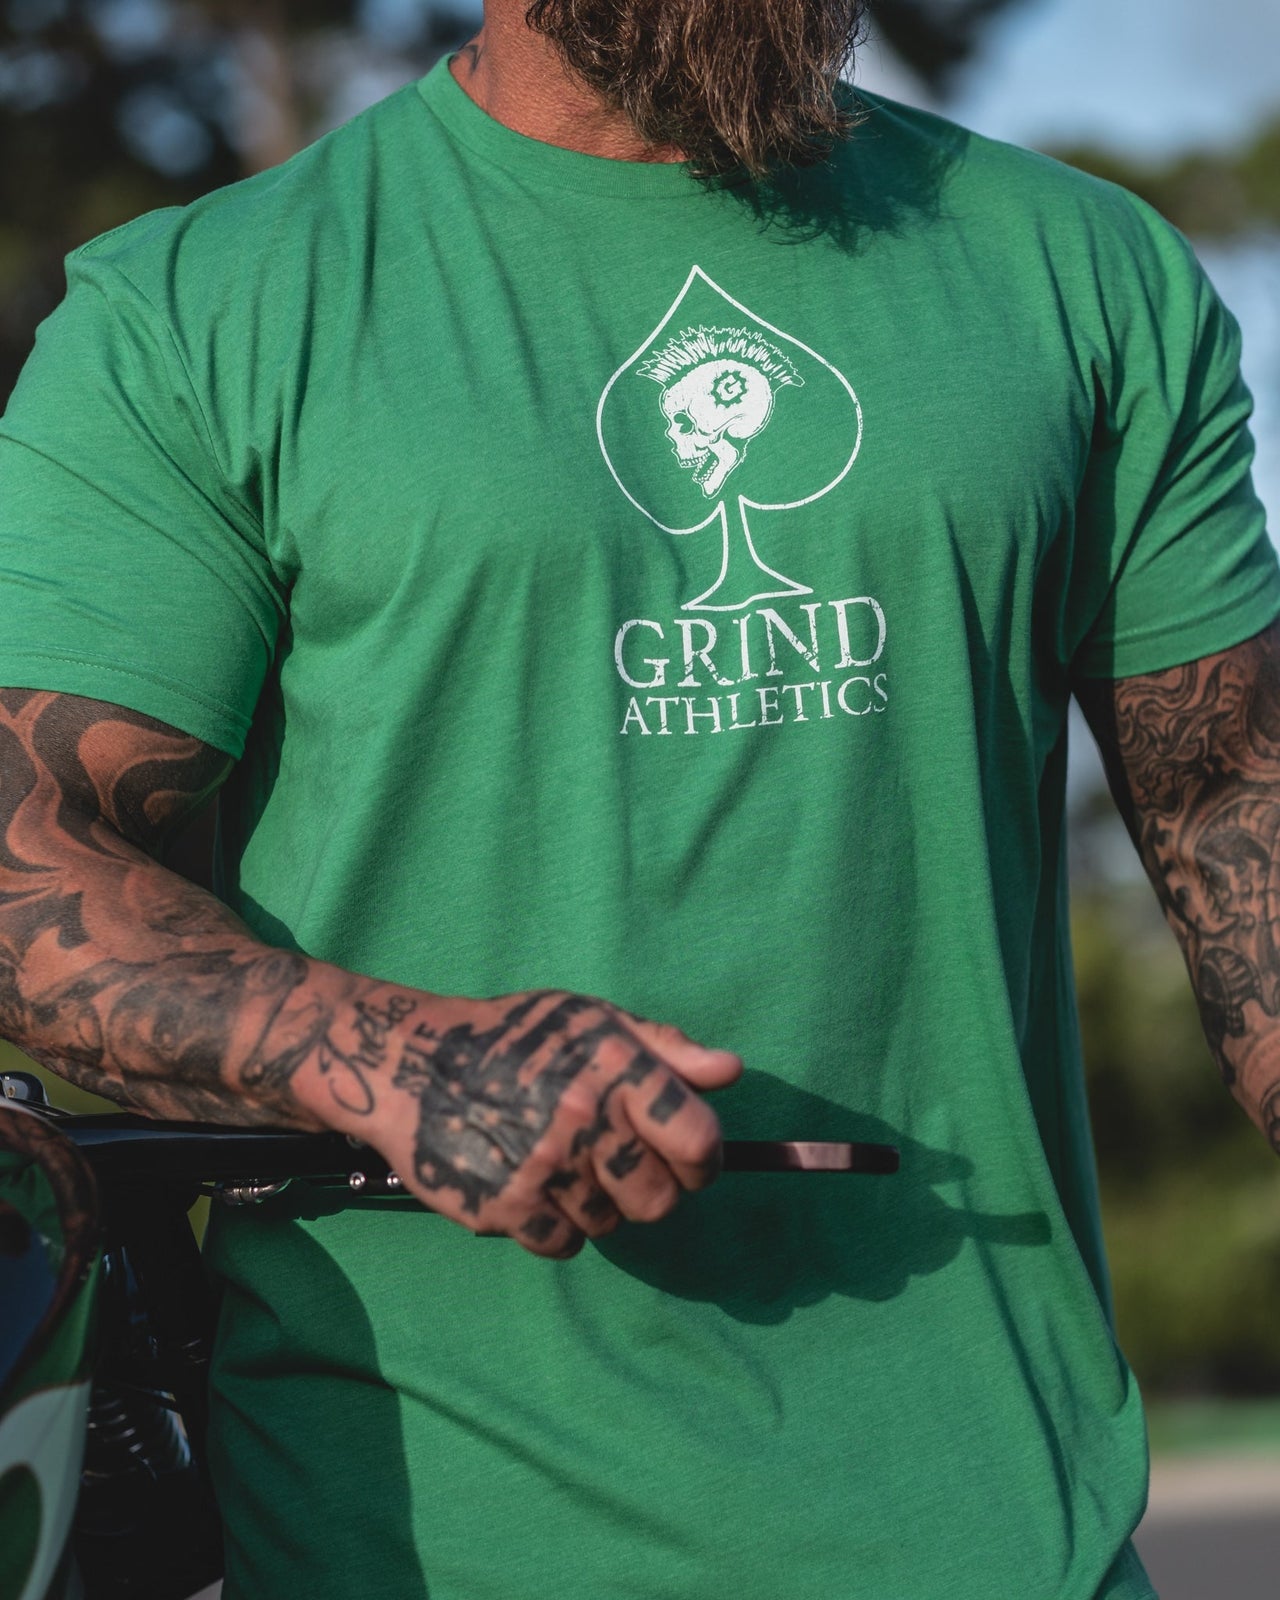 The Grind Athletics Luck Favors The Prepared T